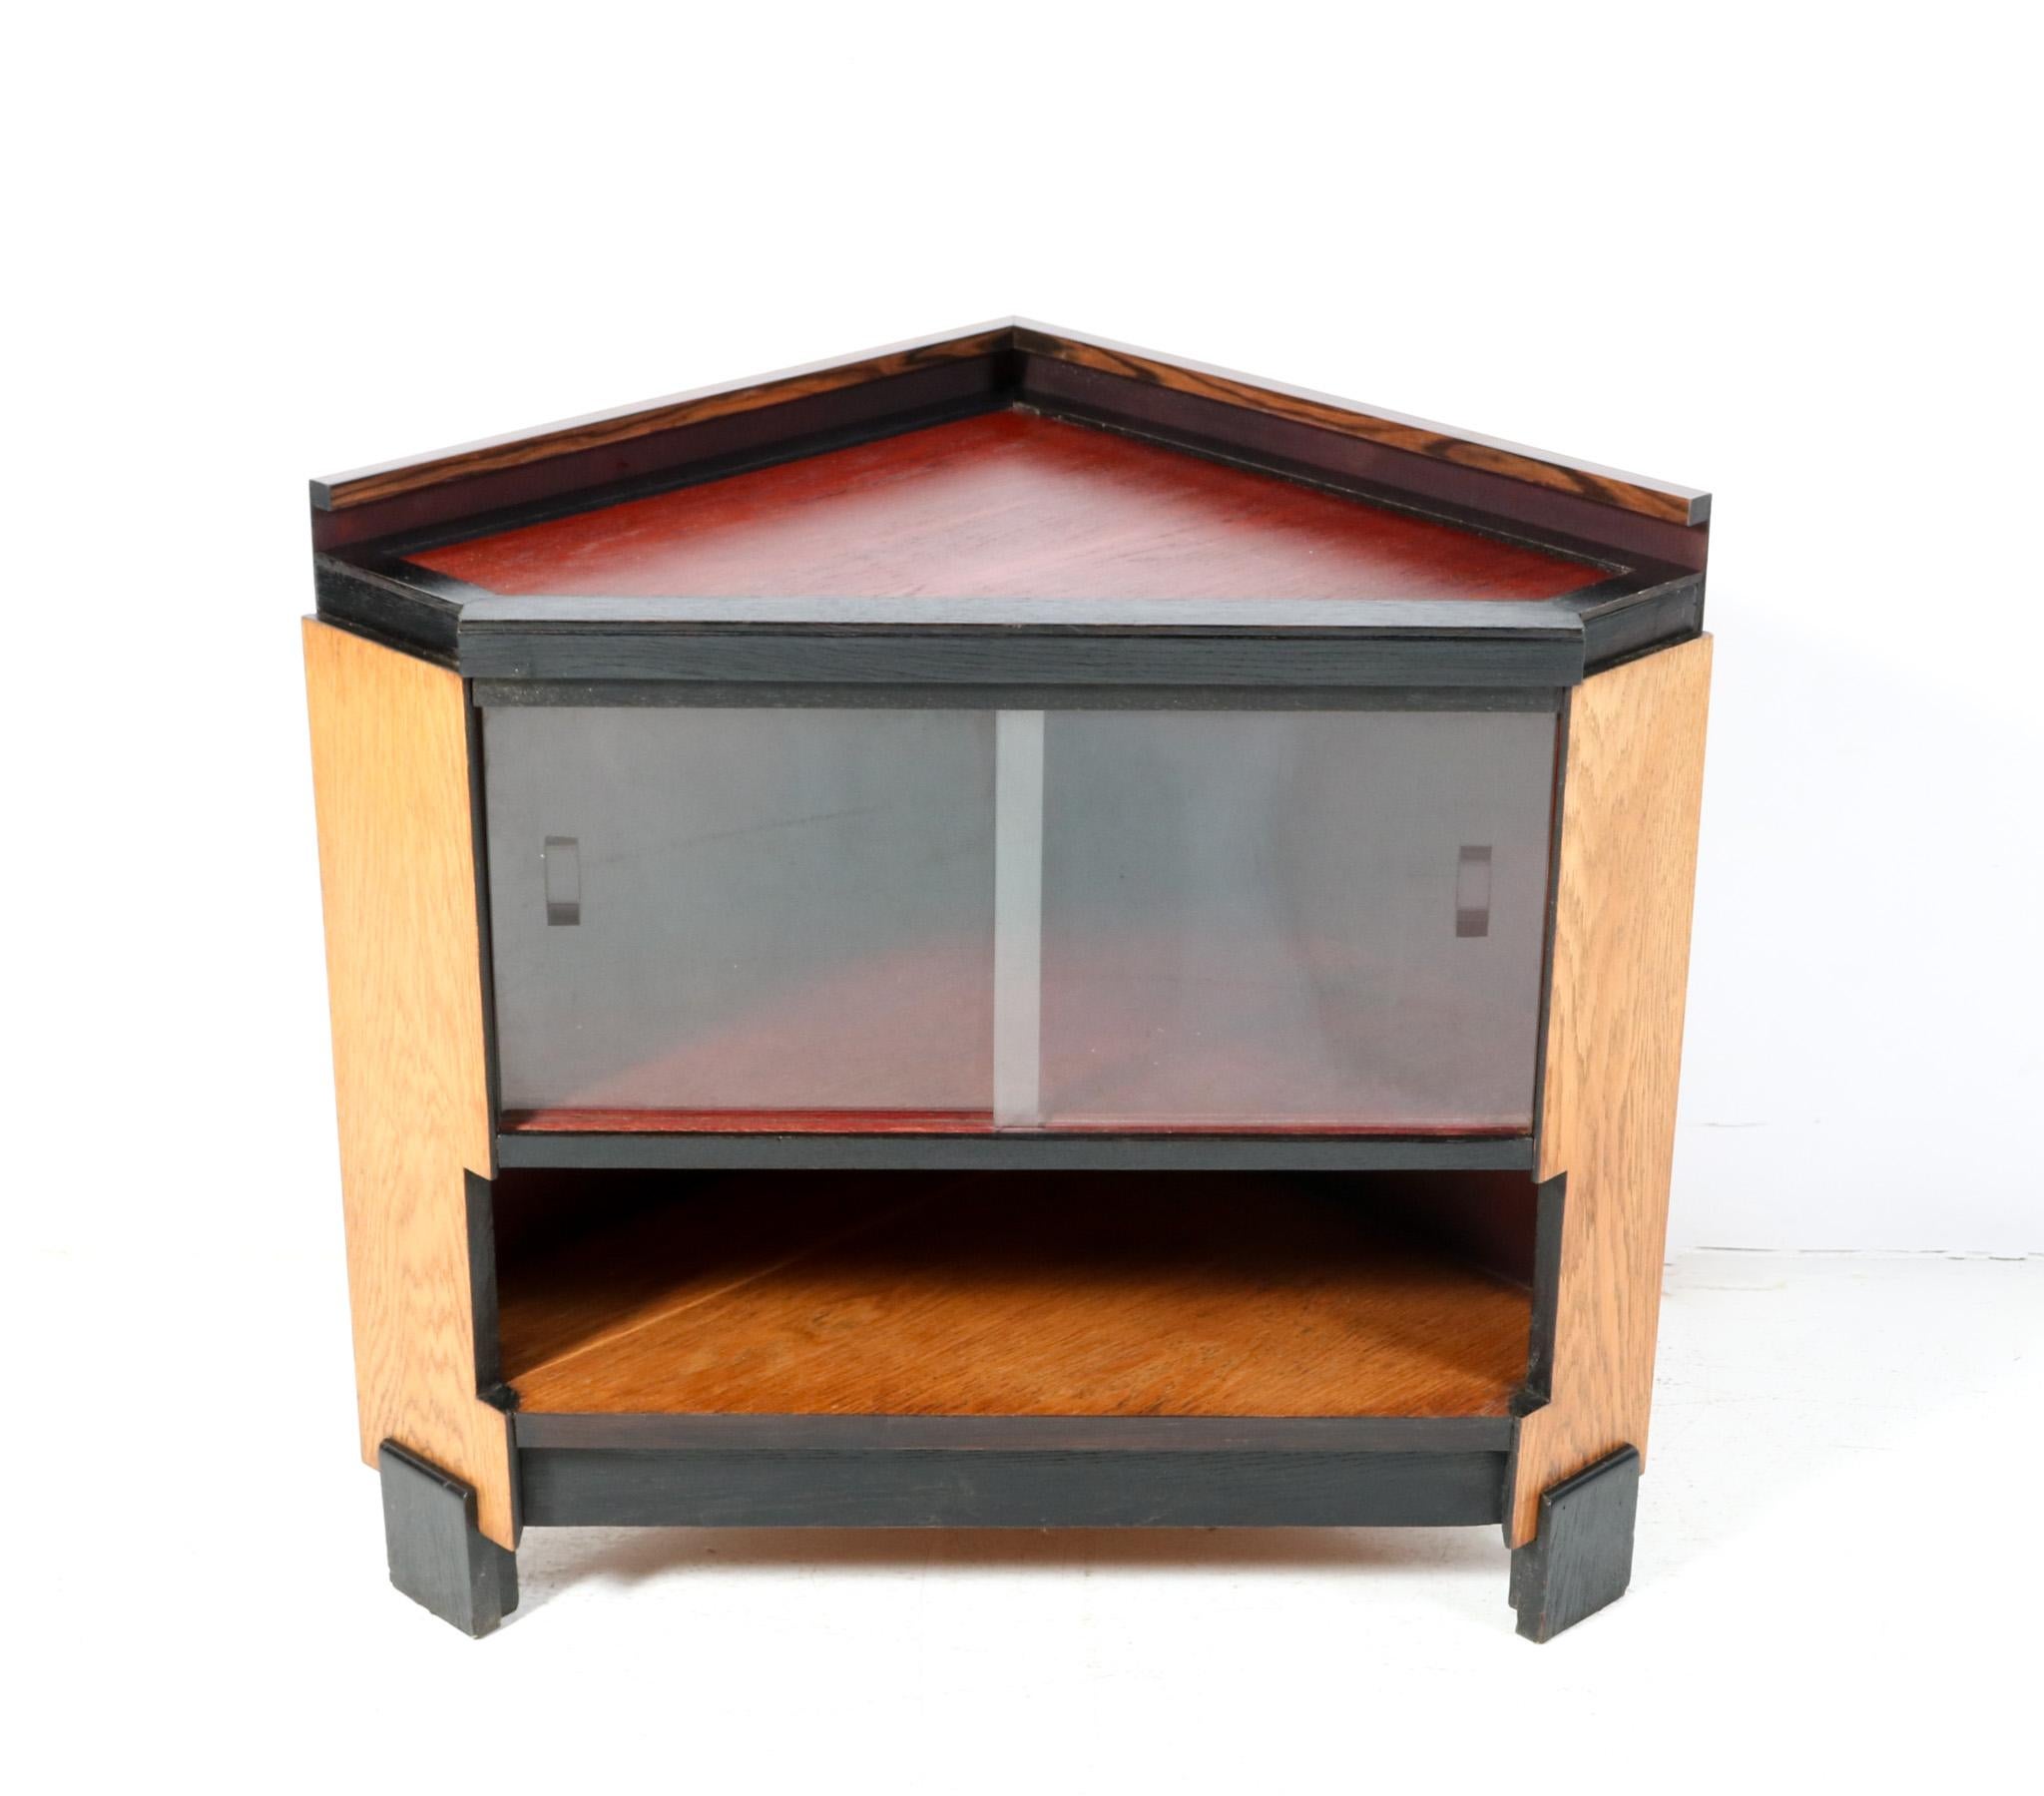 Magnificent and ultra rare Art Deco Modernist corner cabinet.
Design in the style of Jan Brunott.
Striking Dutch design from the 1920s.
Solid oak base with original black lacquered lining.
Original red lacquered top with solid macassar ebony